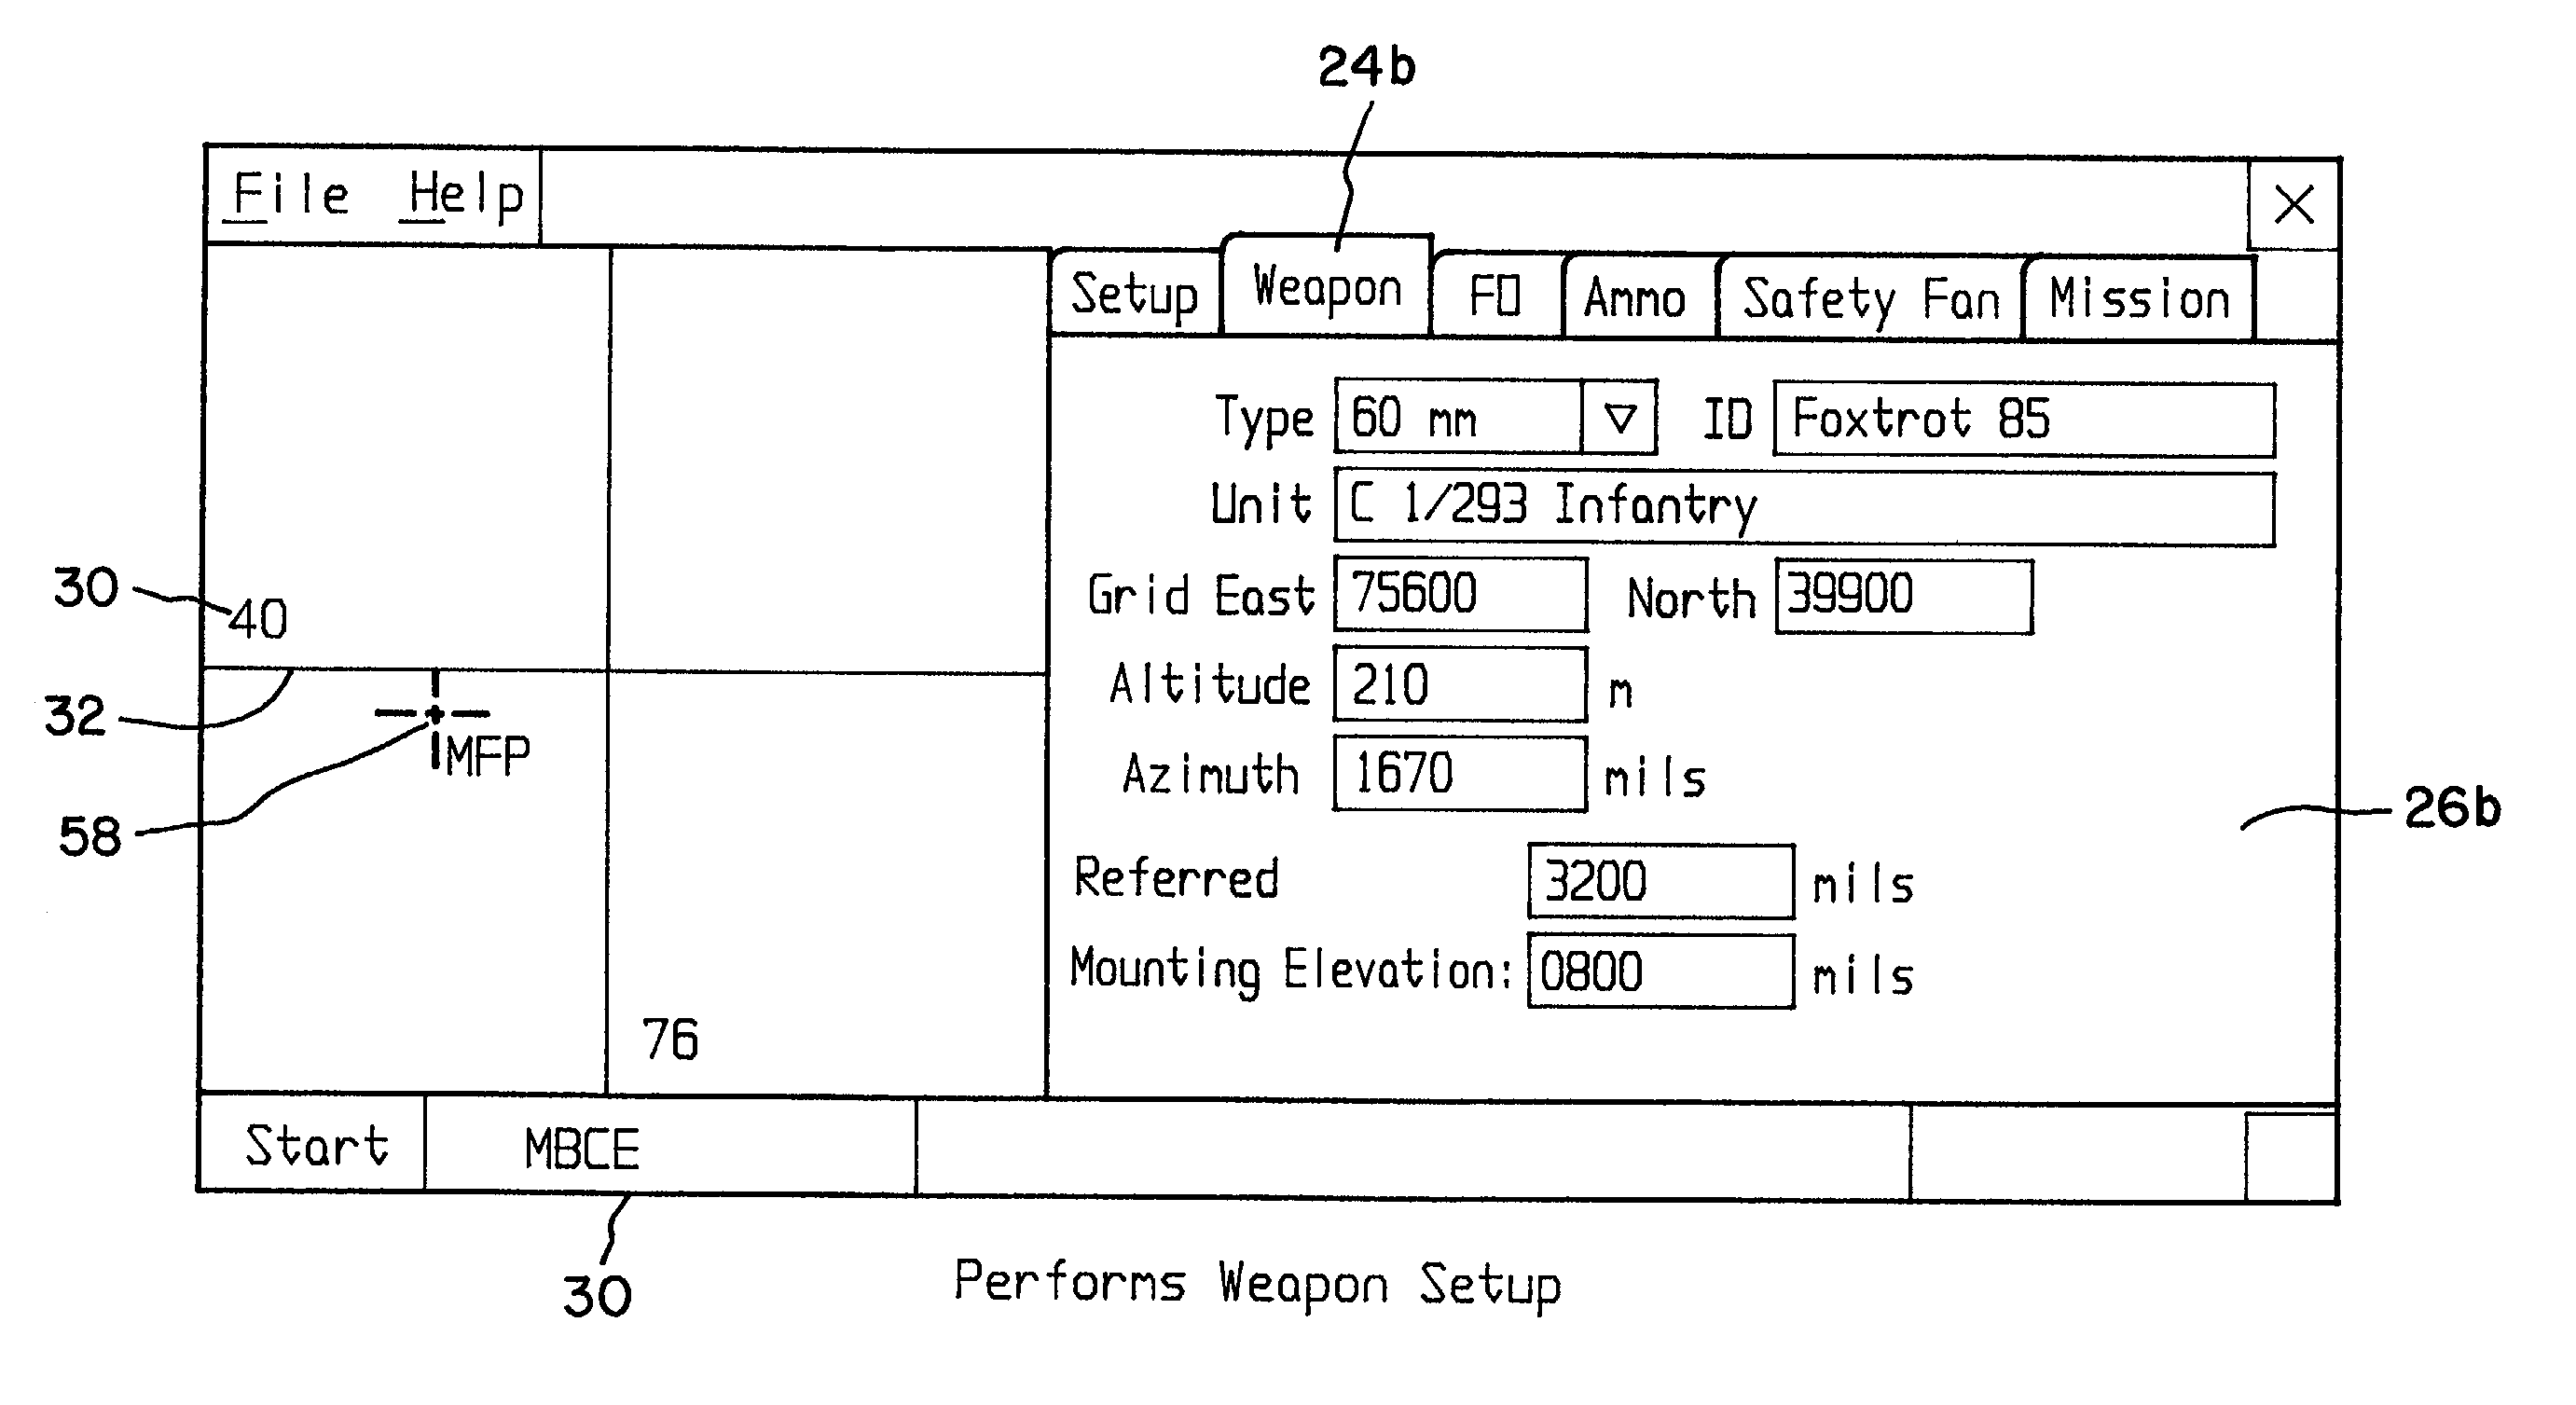 Mortar ballistic computer and system